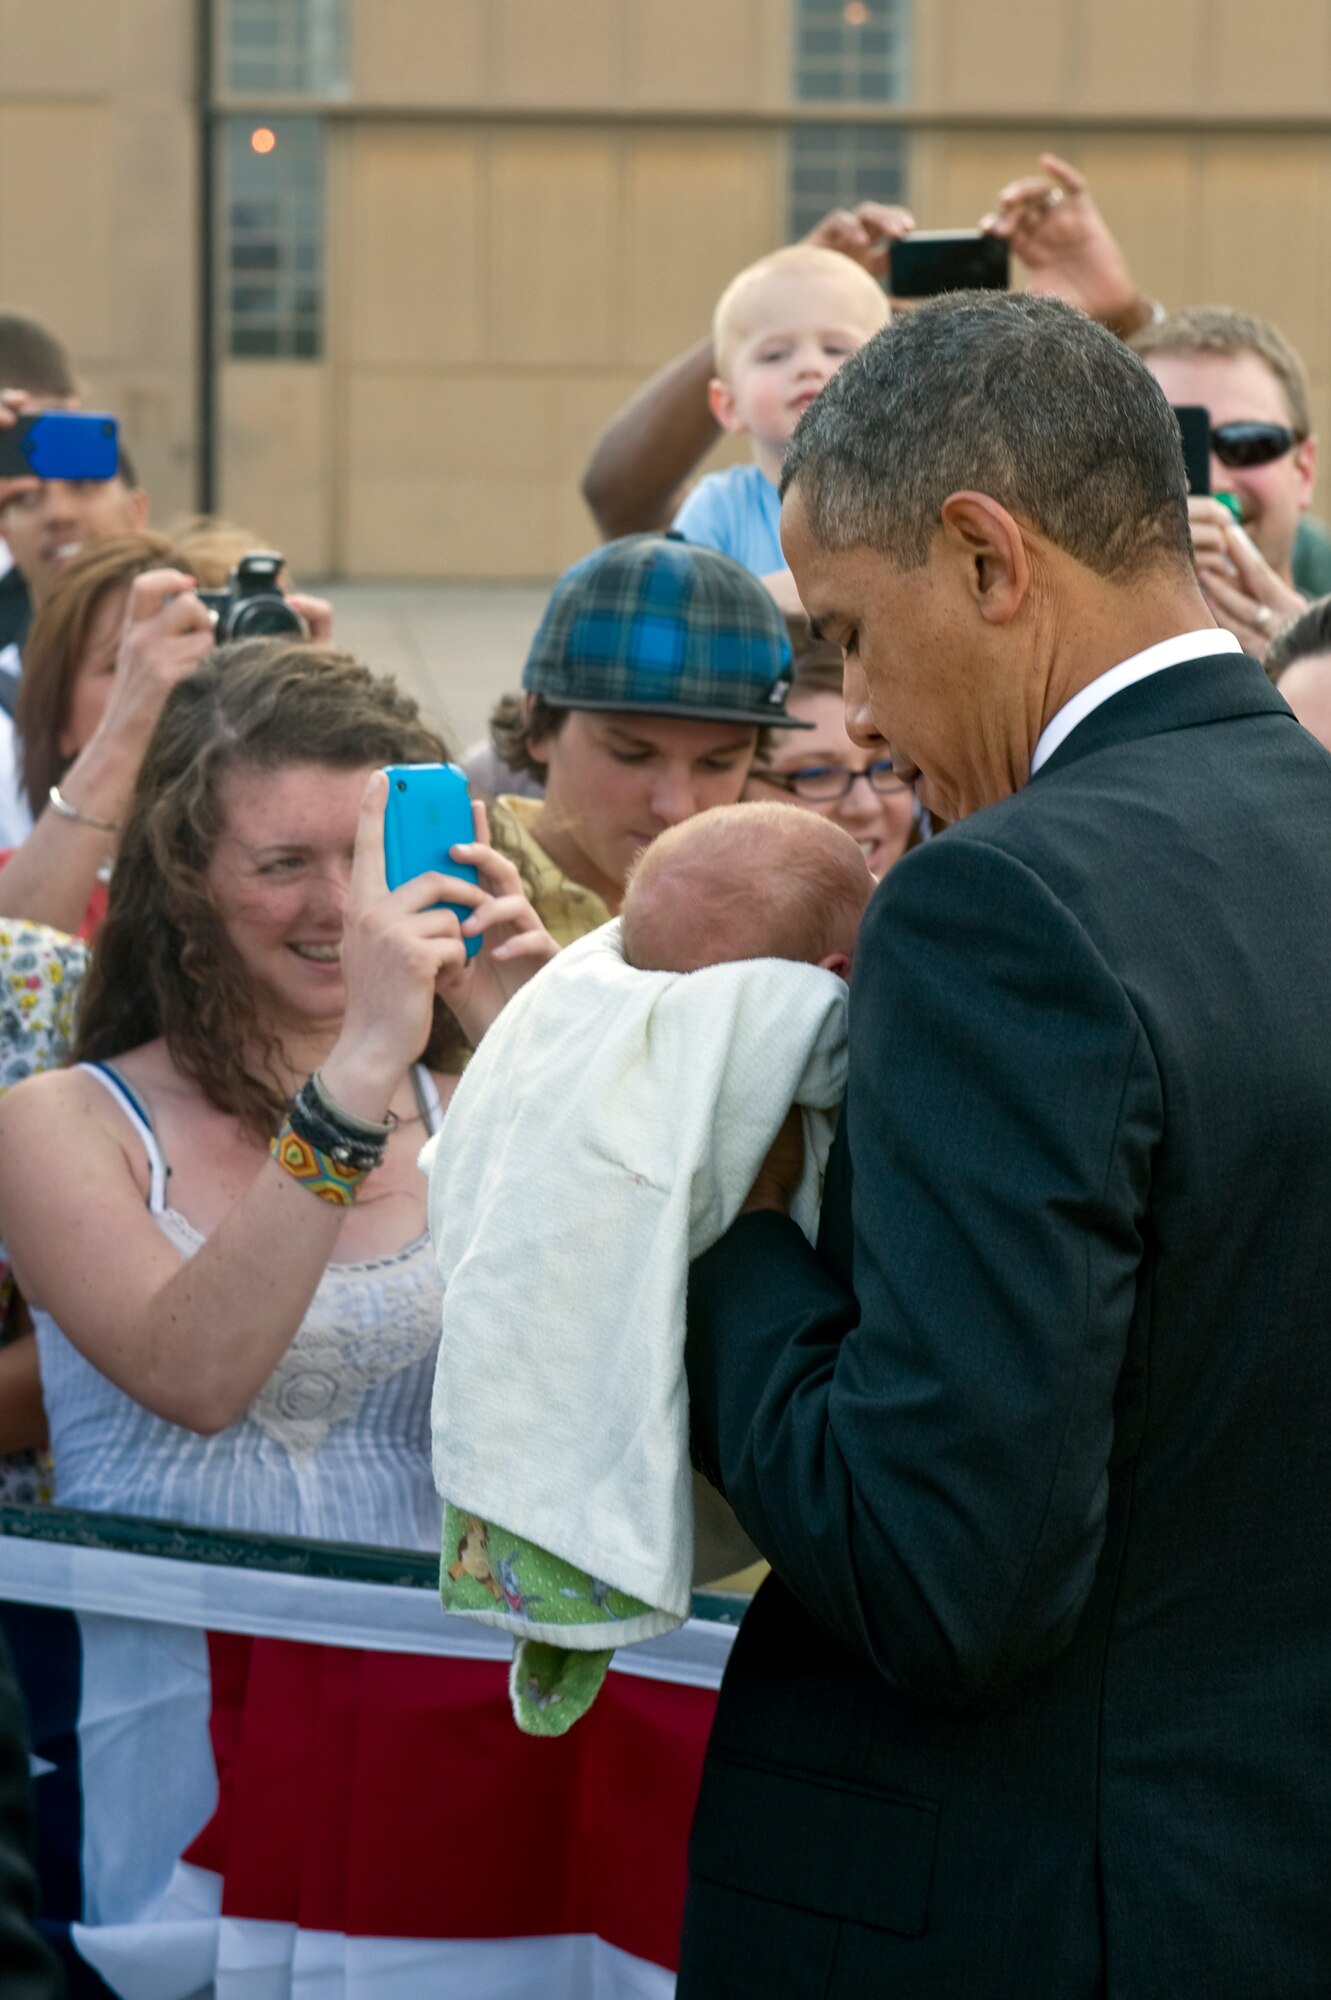 BUCKLEY AIR FORCE BASE, Colo. – President Barack Obama holds a baby from the crowd, here, April 24, 2012. (U.S. Air Force photo by Airman 1st Class Riley Johnson)